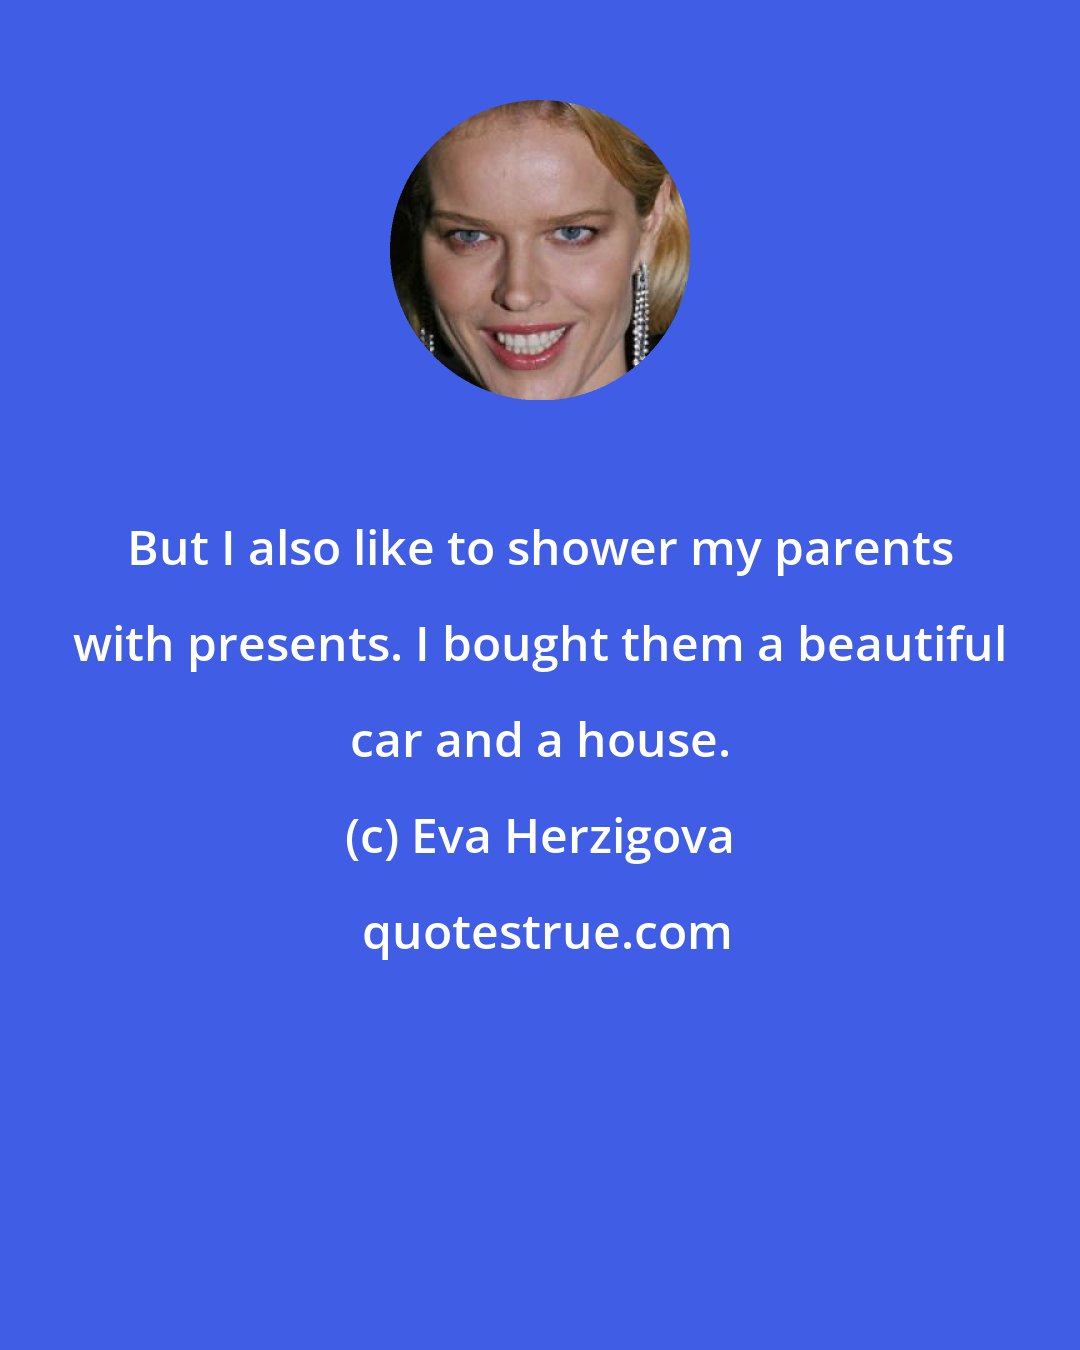 Eva Herzigova: But I also like to shower my parents with presents. I bought them a beautiful car and a house.